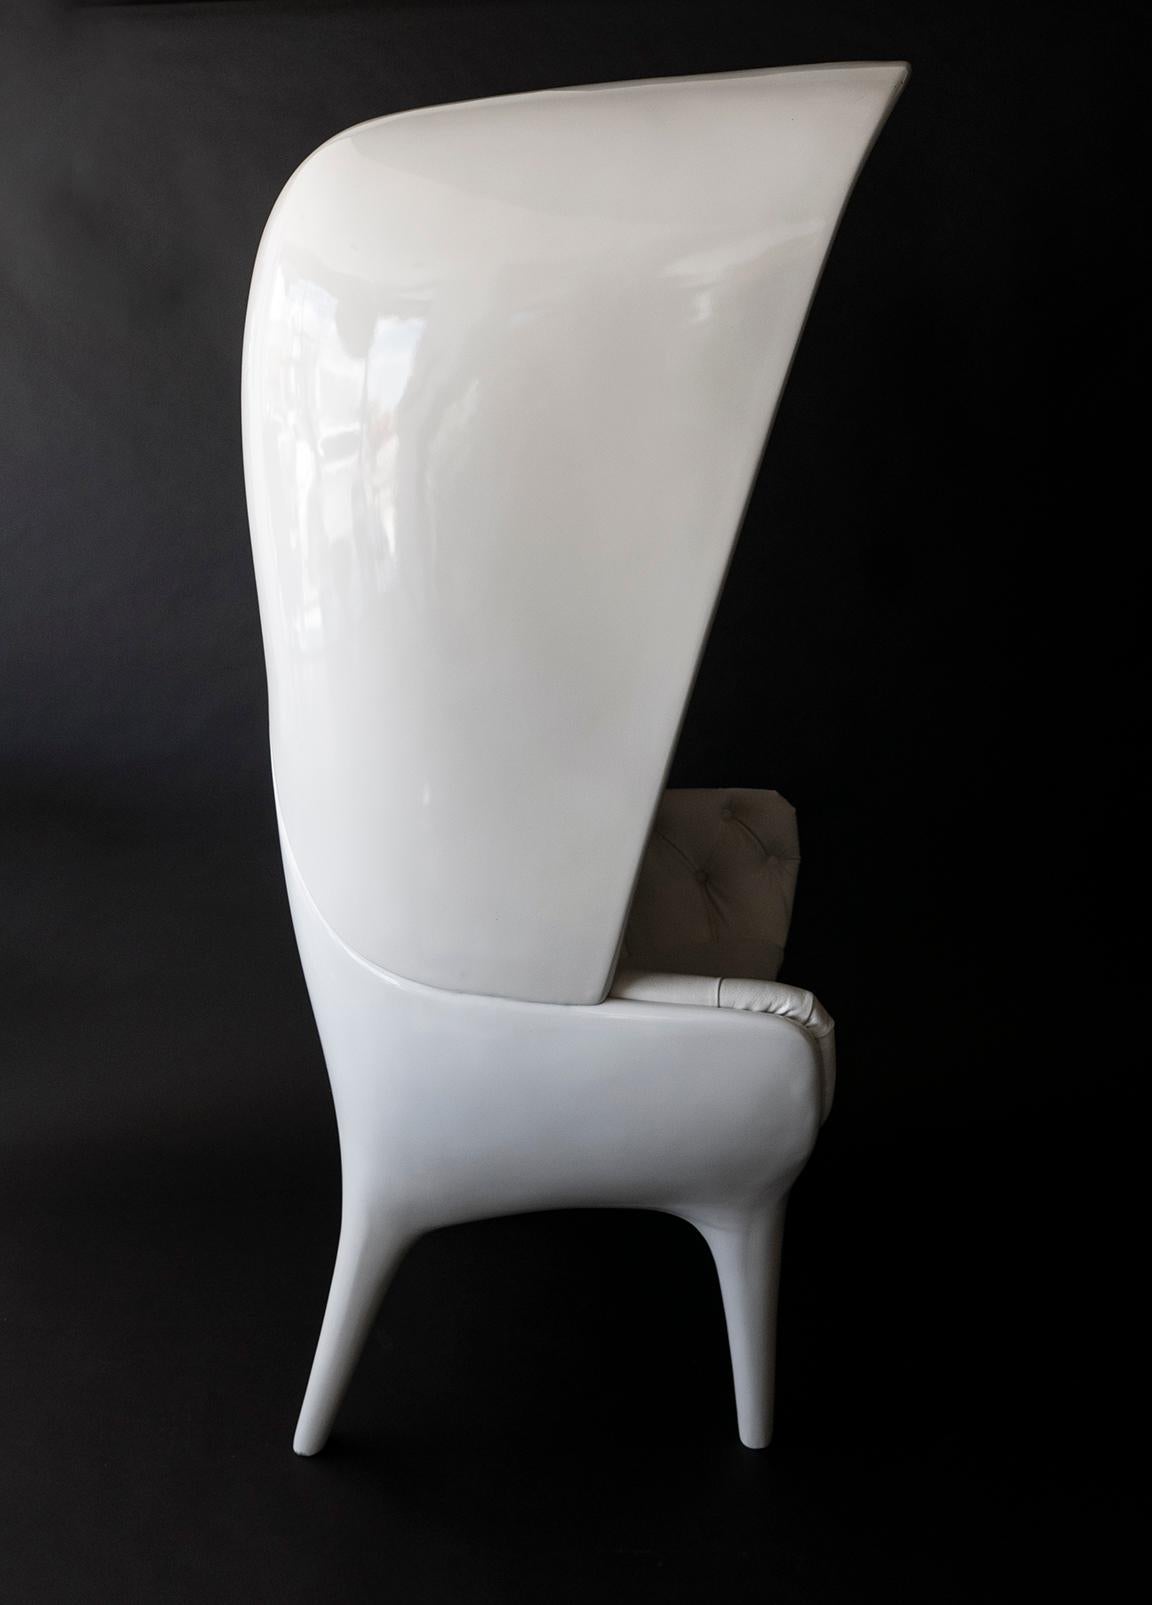 Leather Jaime Hayon Showtime Armchair White Lacquered with Cover For Sale